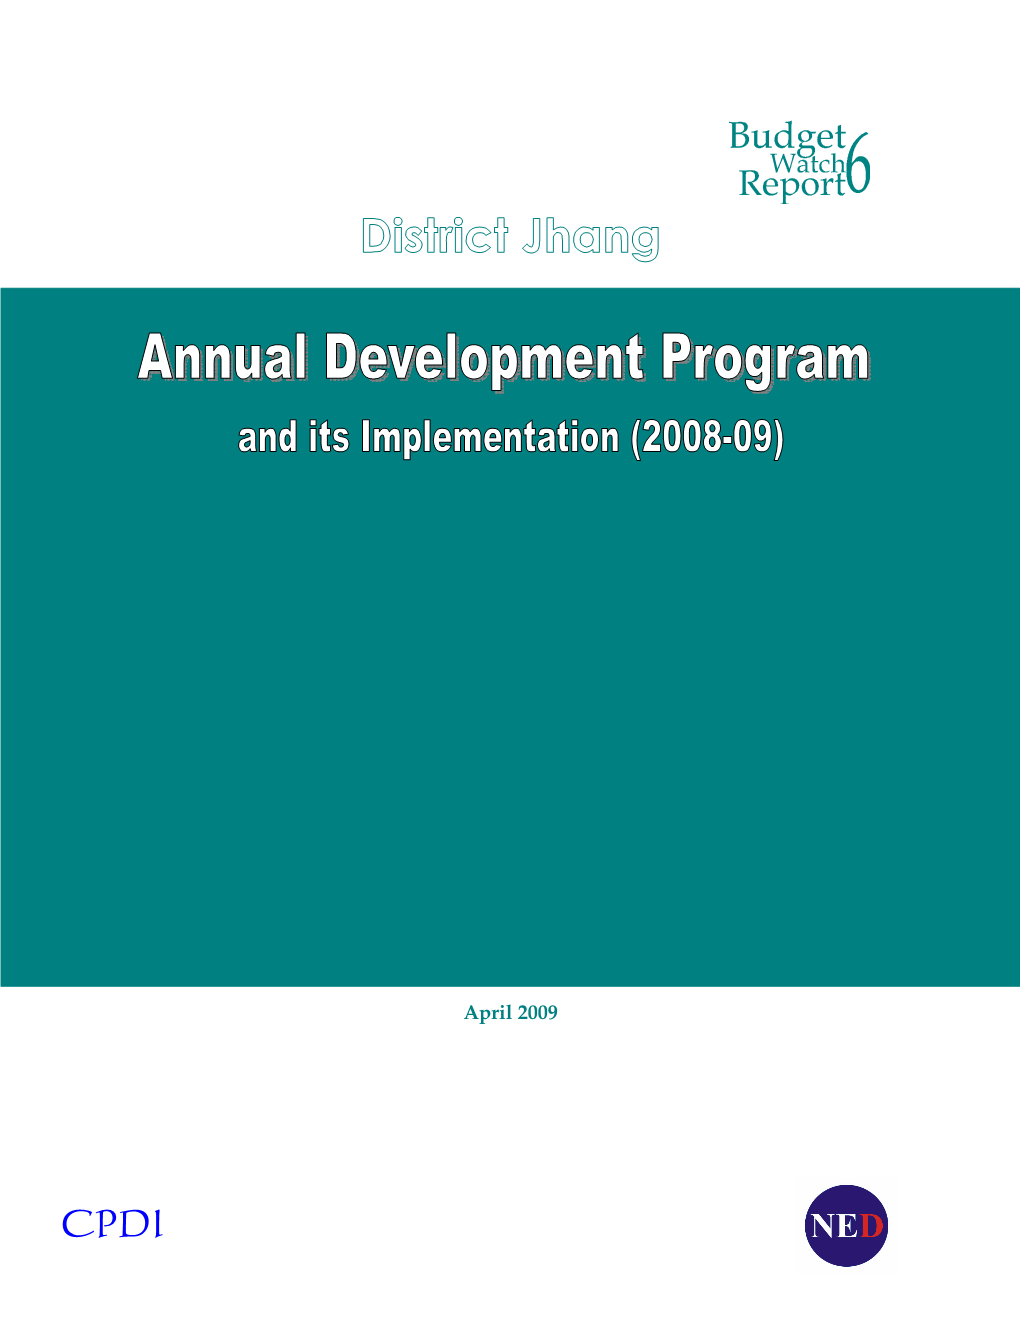 Jhang: Annual Development Program and Its Implementation (2008-09)